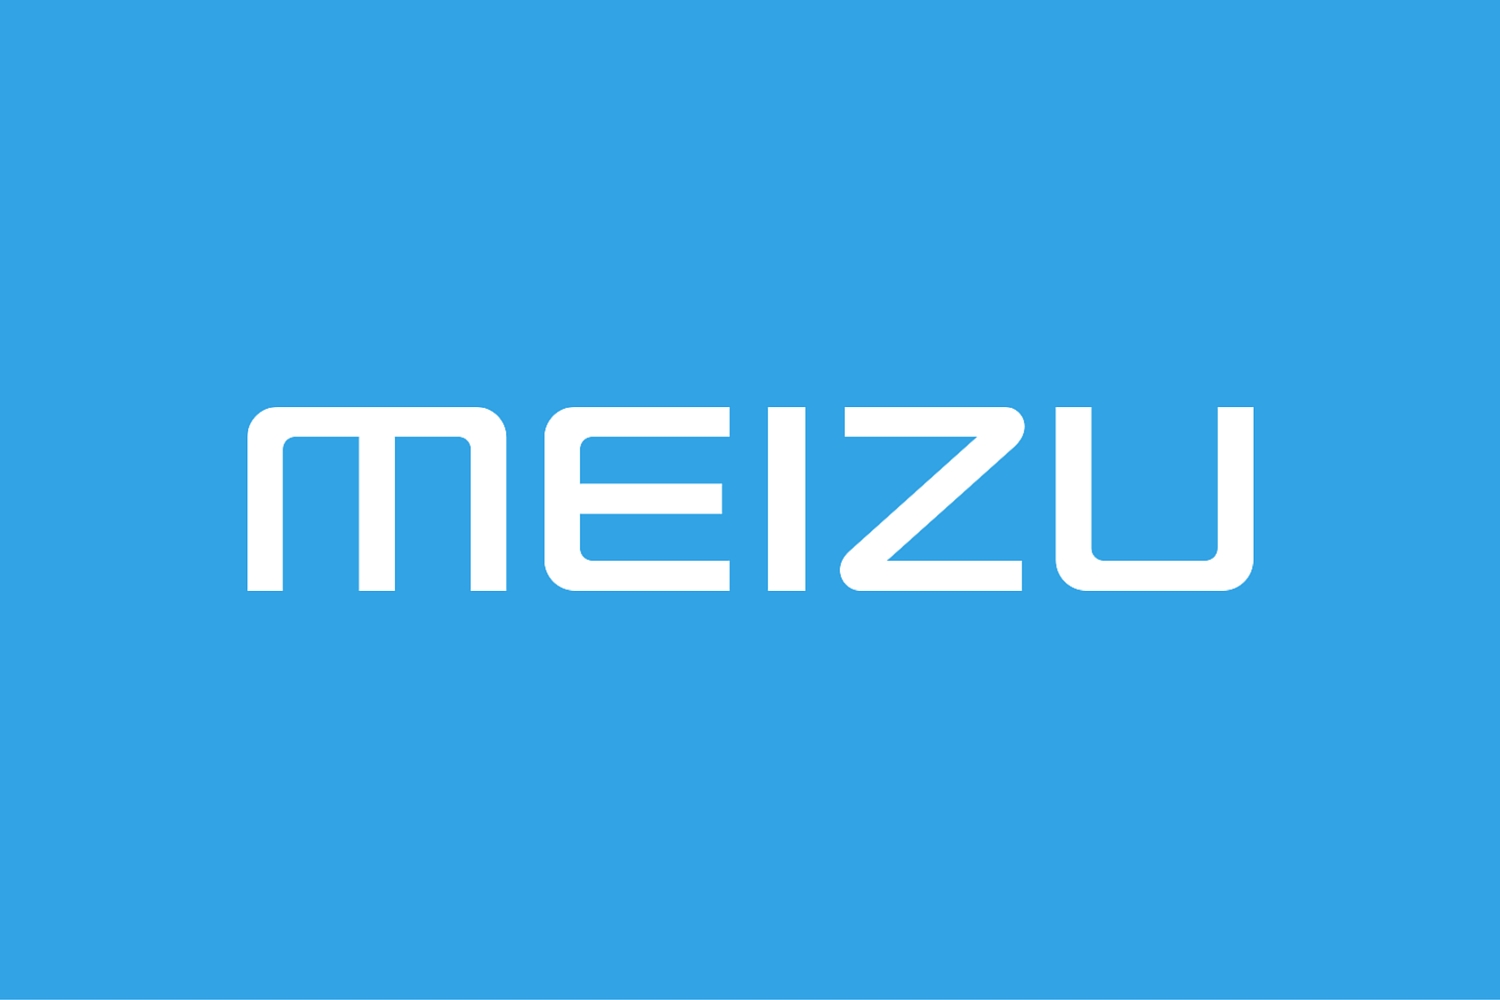 Meizu announced a new brand and named the first new products